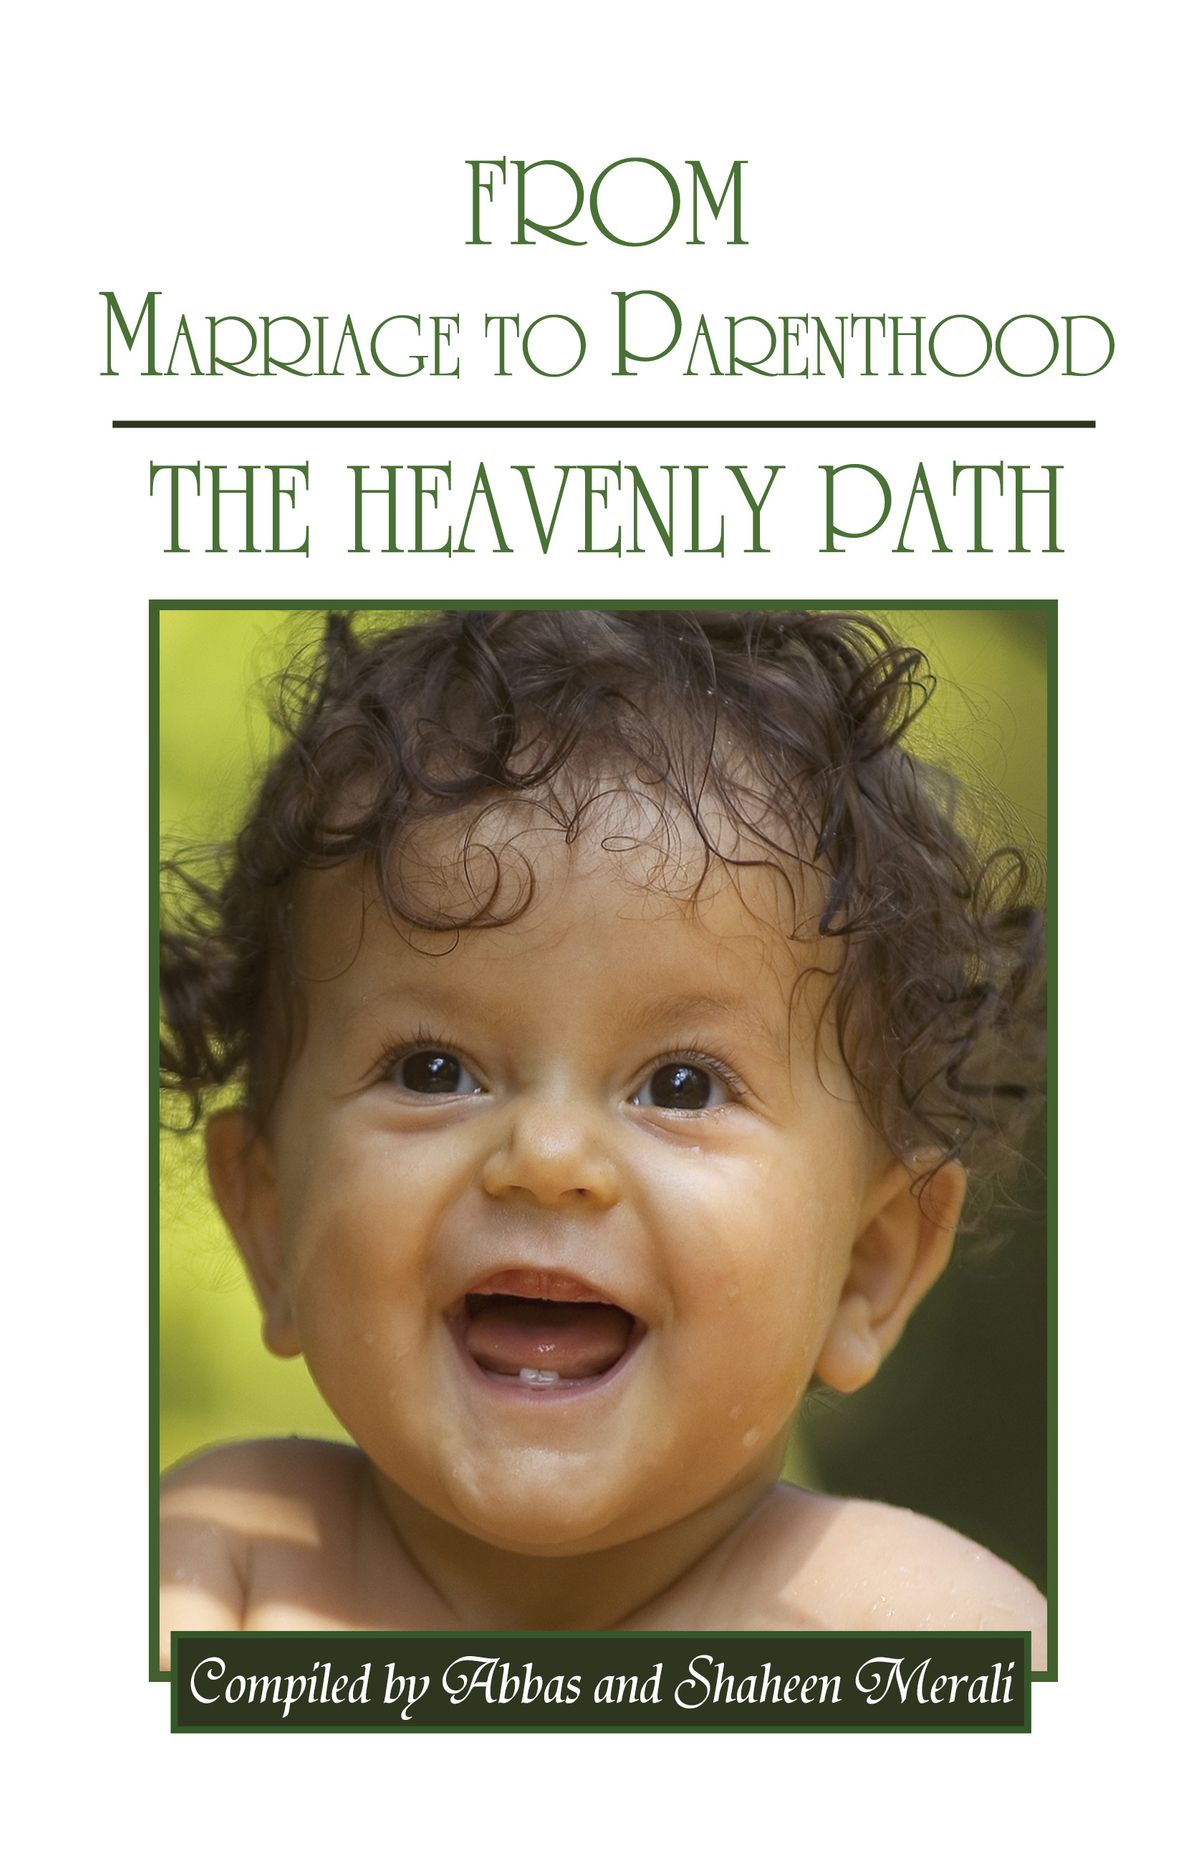  From  Marriage to Parenthood The Heavenly Path